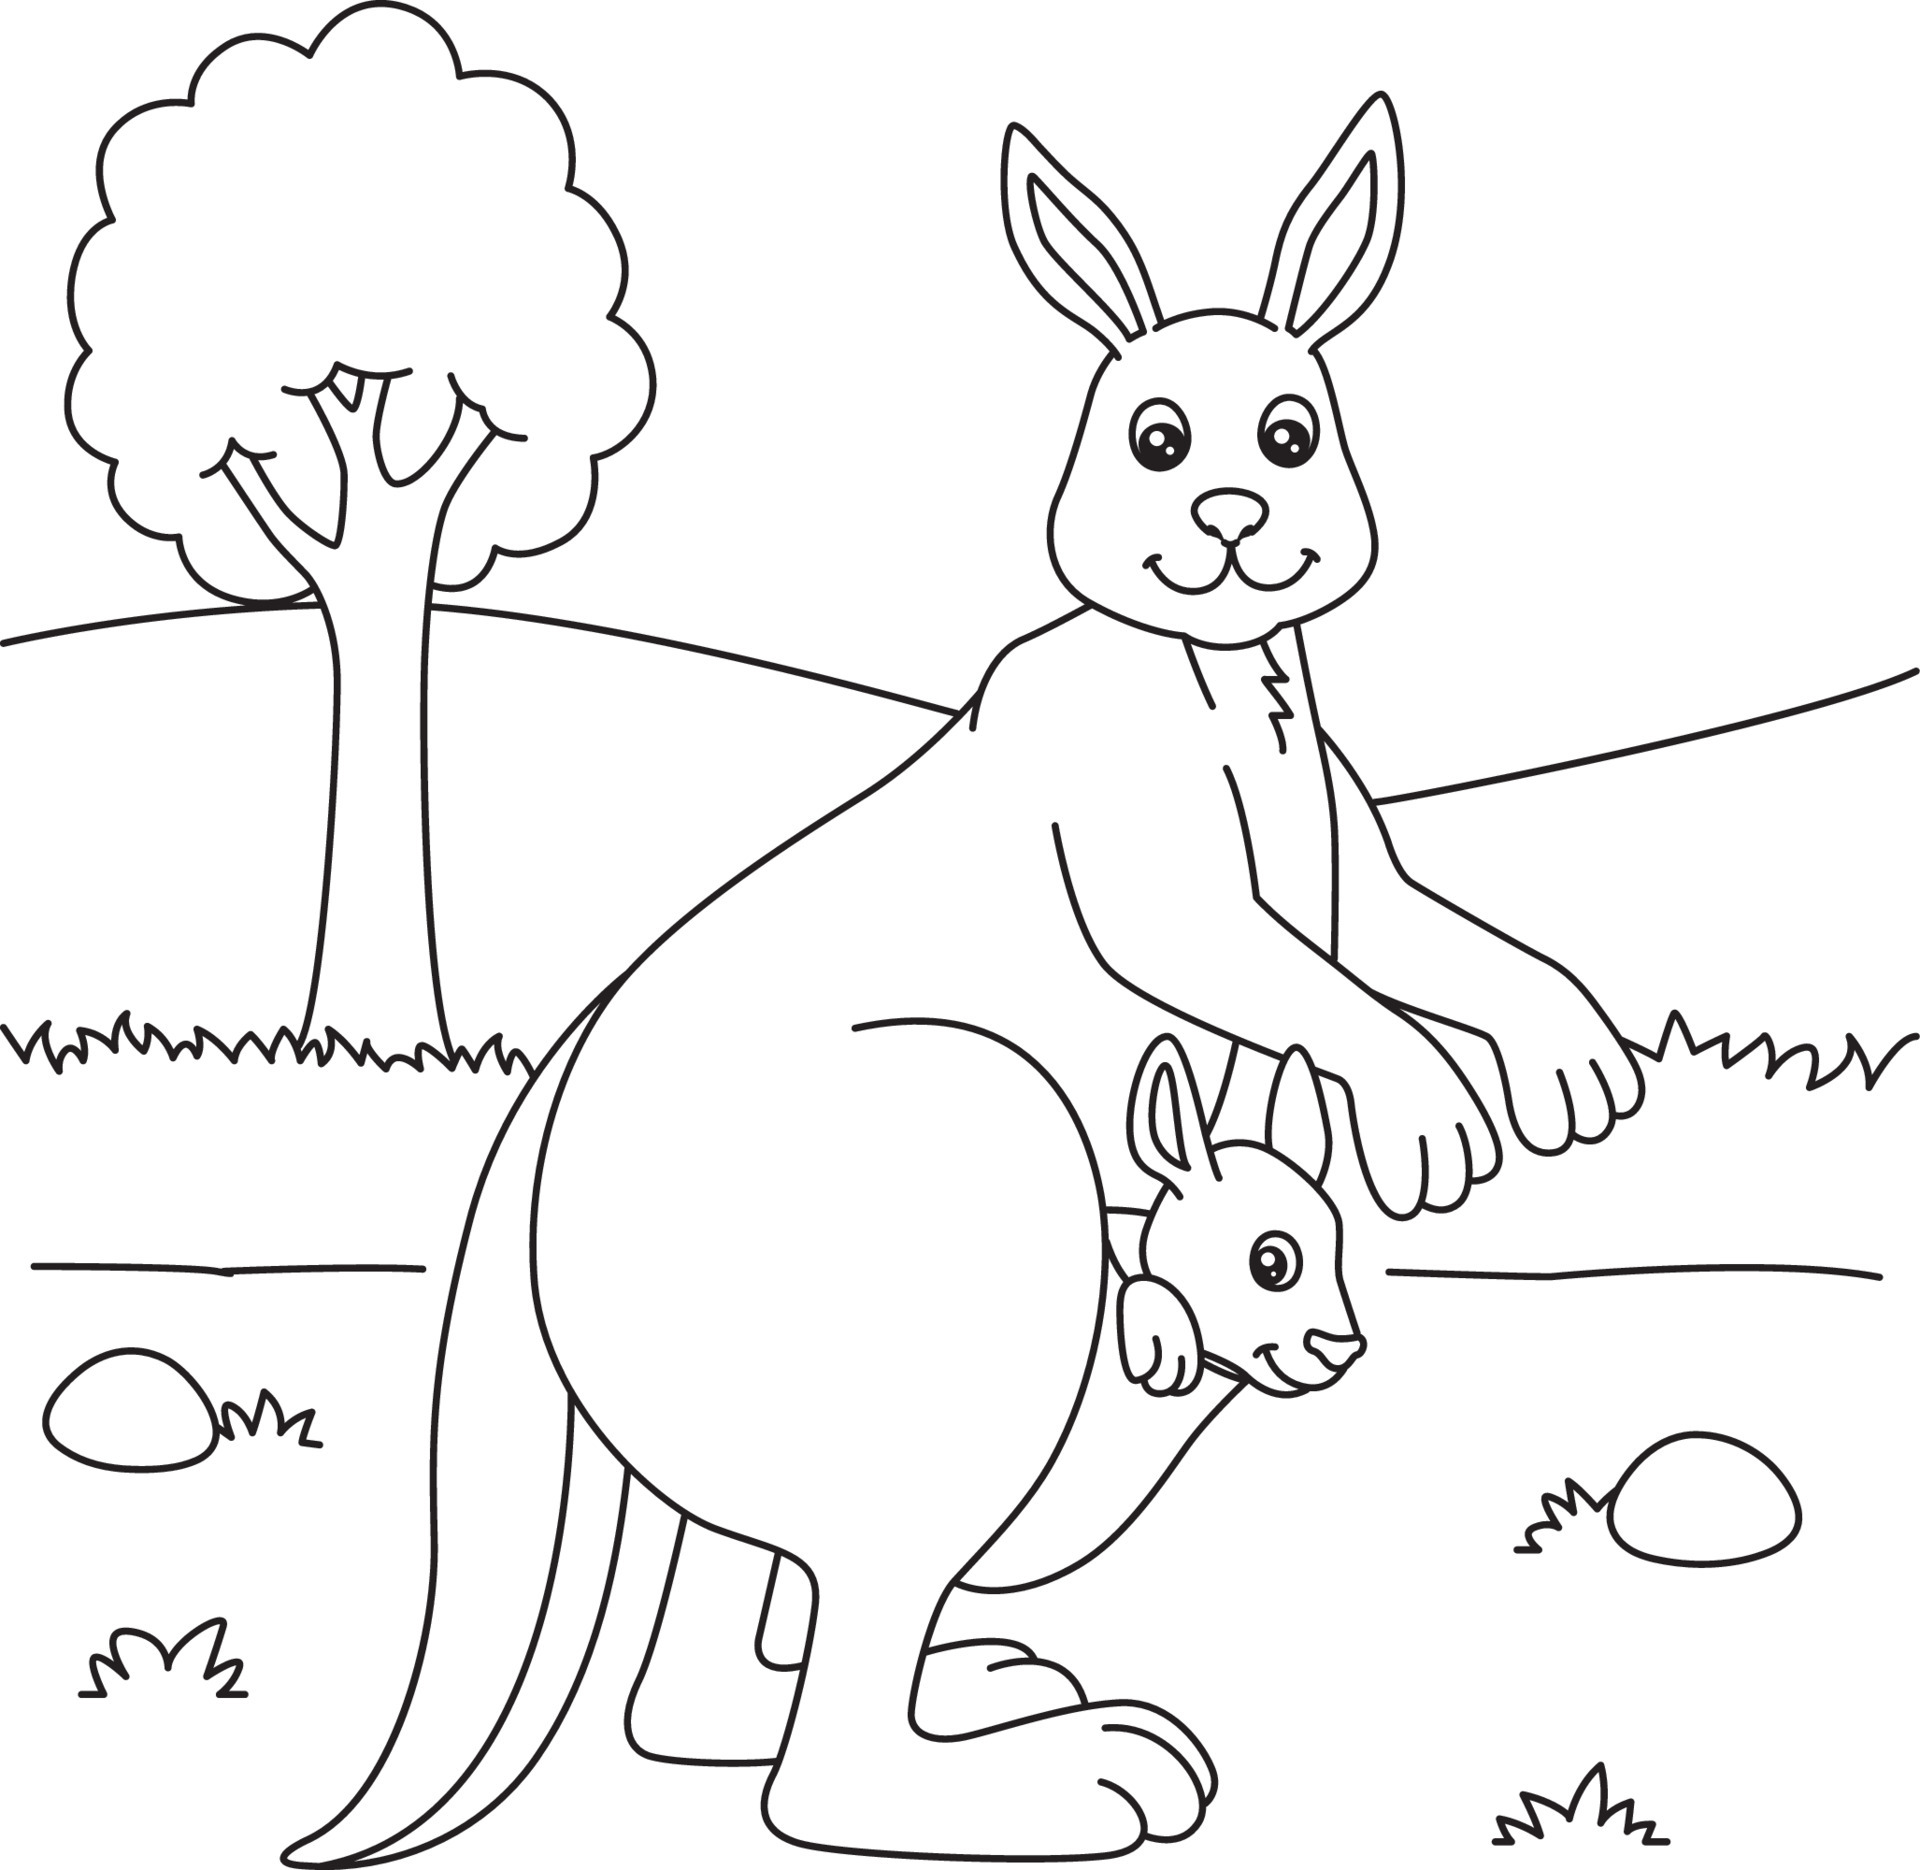 Kangaroo Coloring Page for Kids 21 Vector Art at Vecteezy